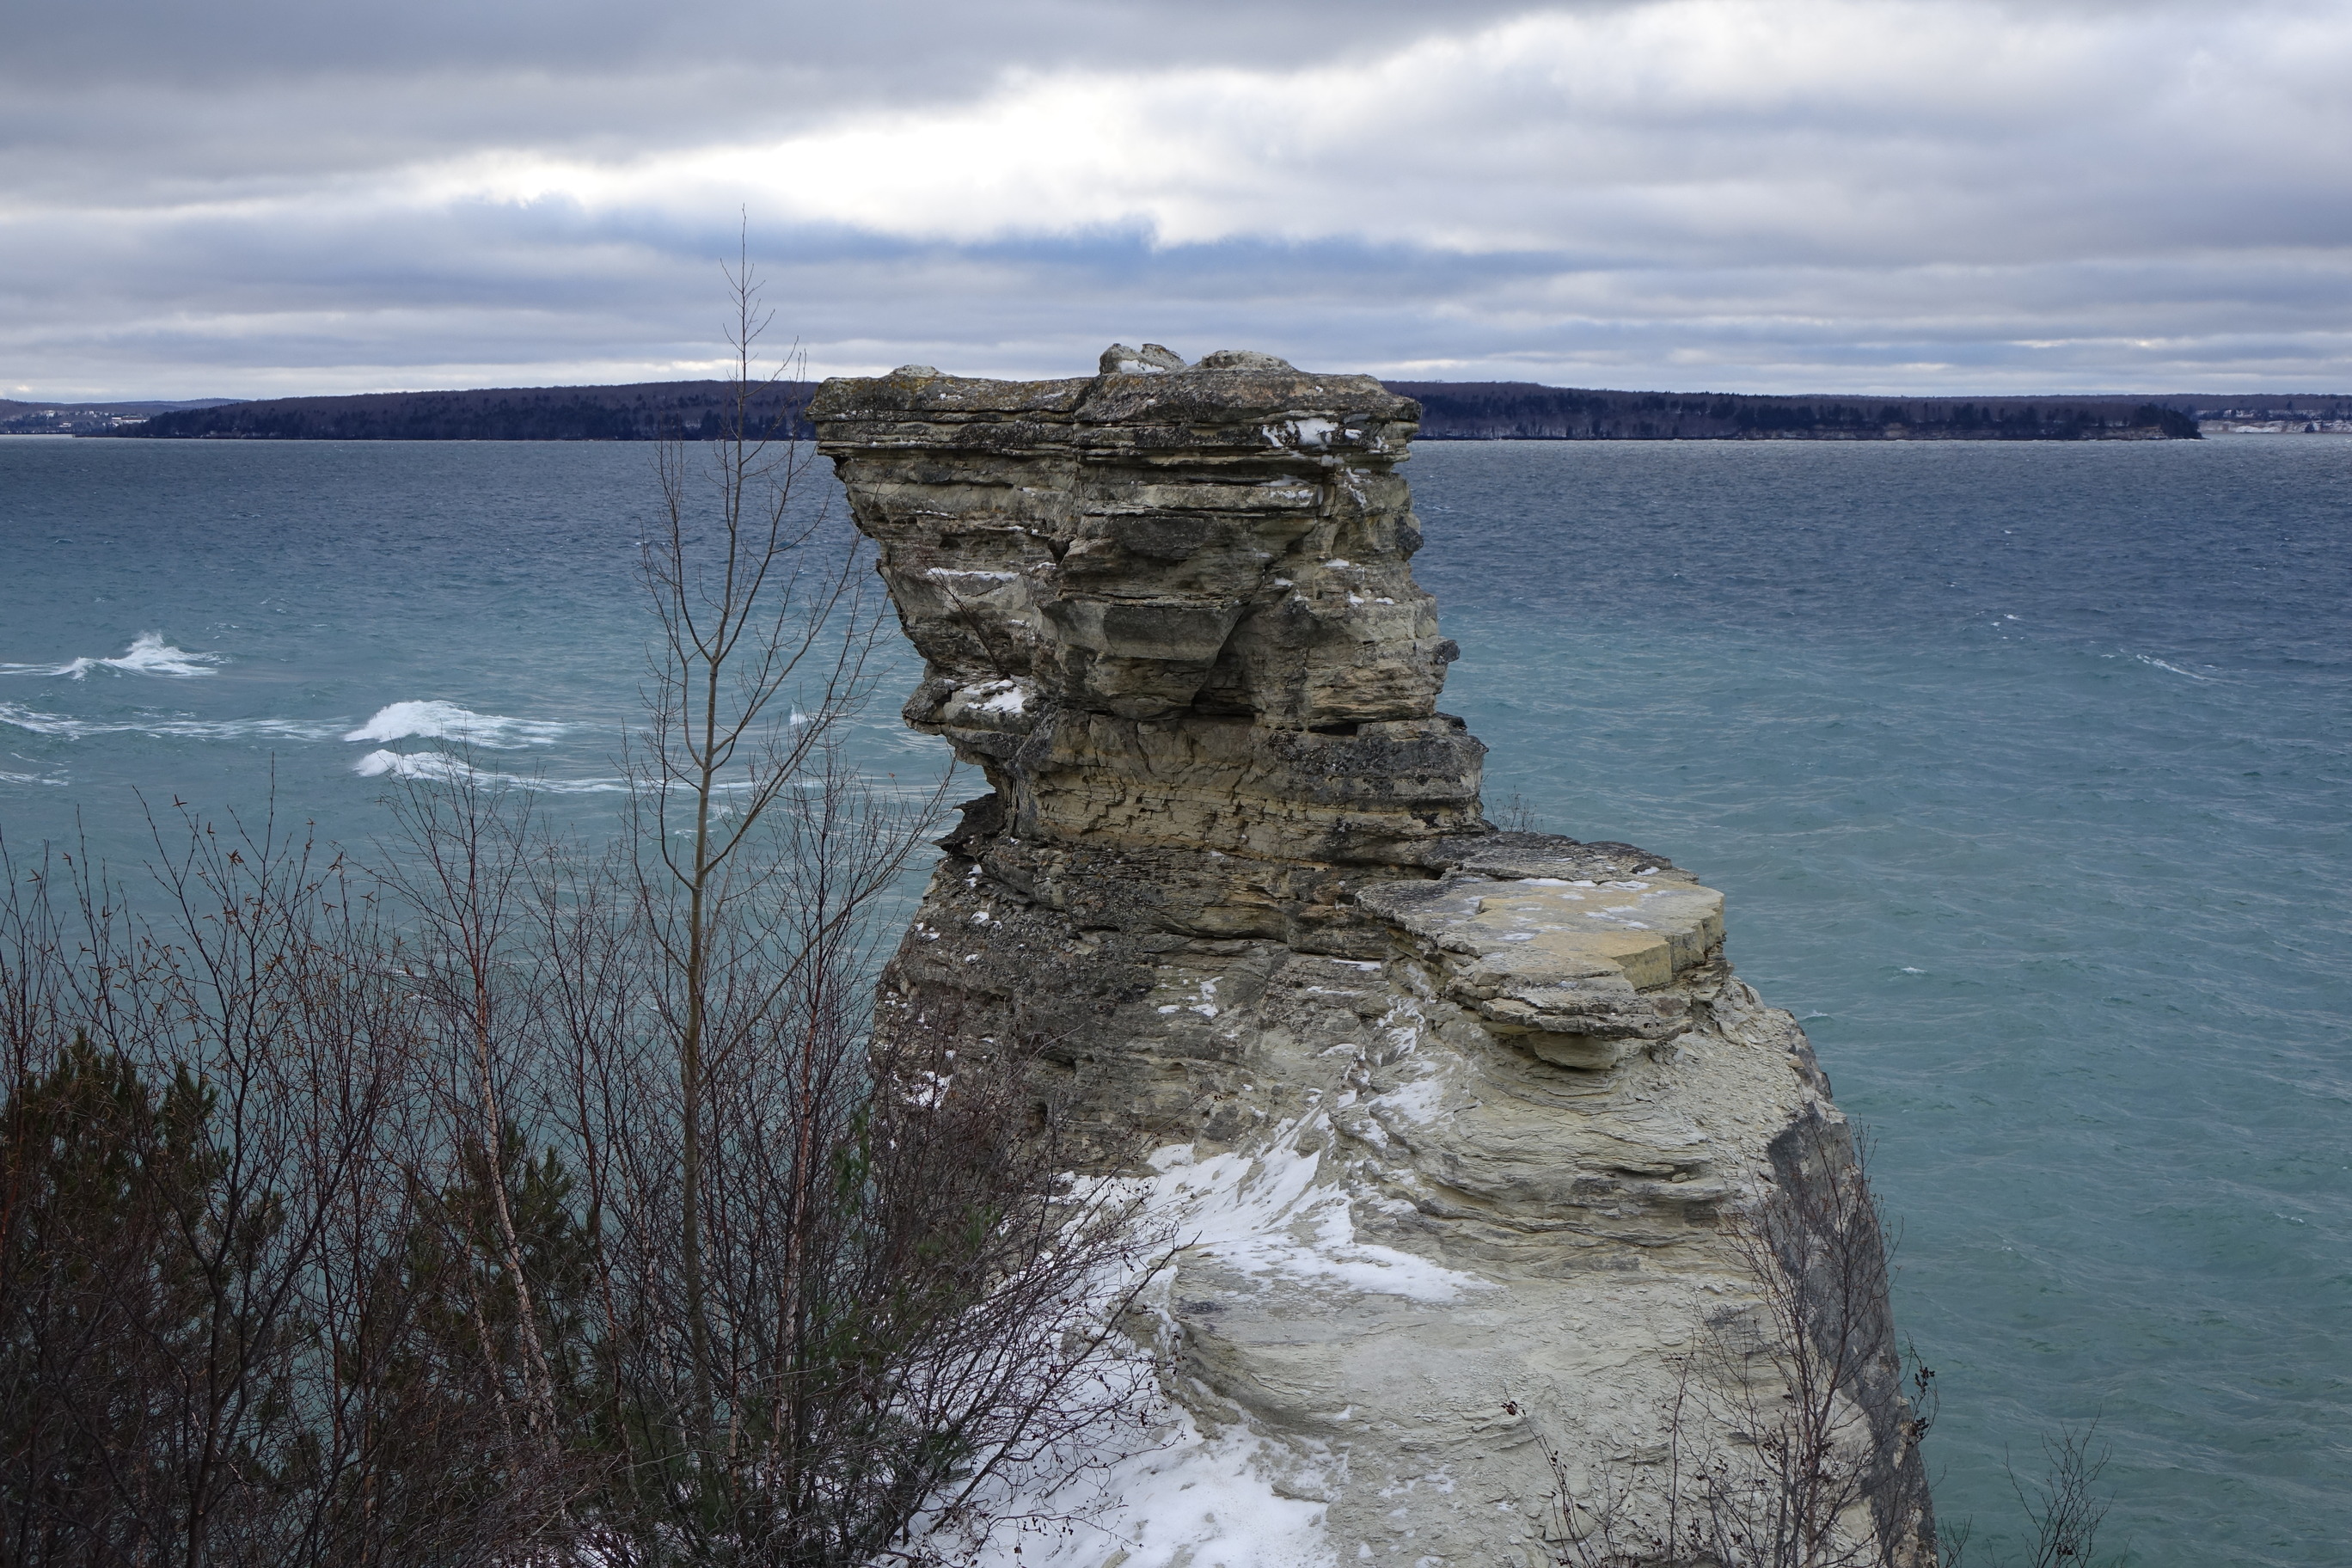 The top of the rock formation looks like a castle turret. Light snow is on the ground. Lake Superior waves are in the distance.